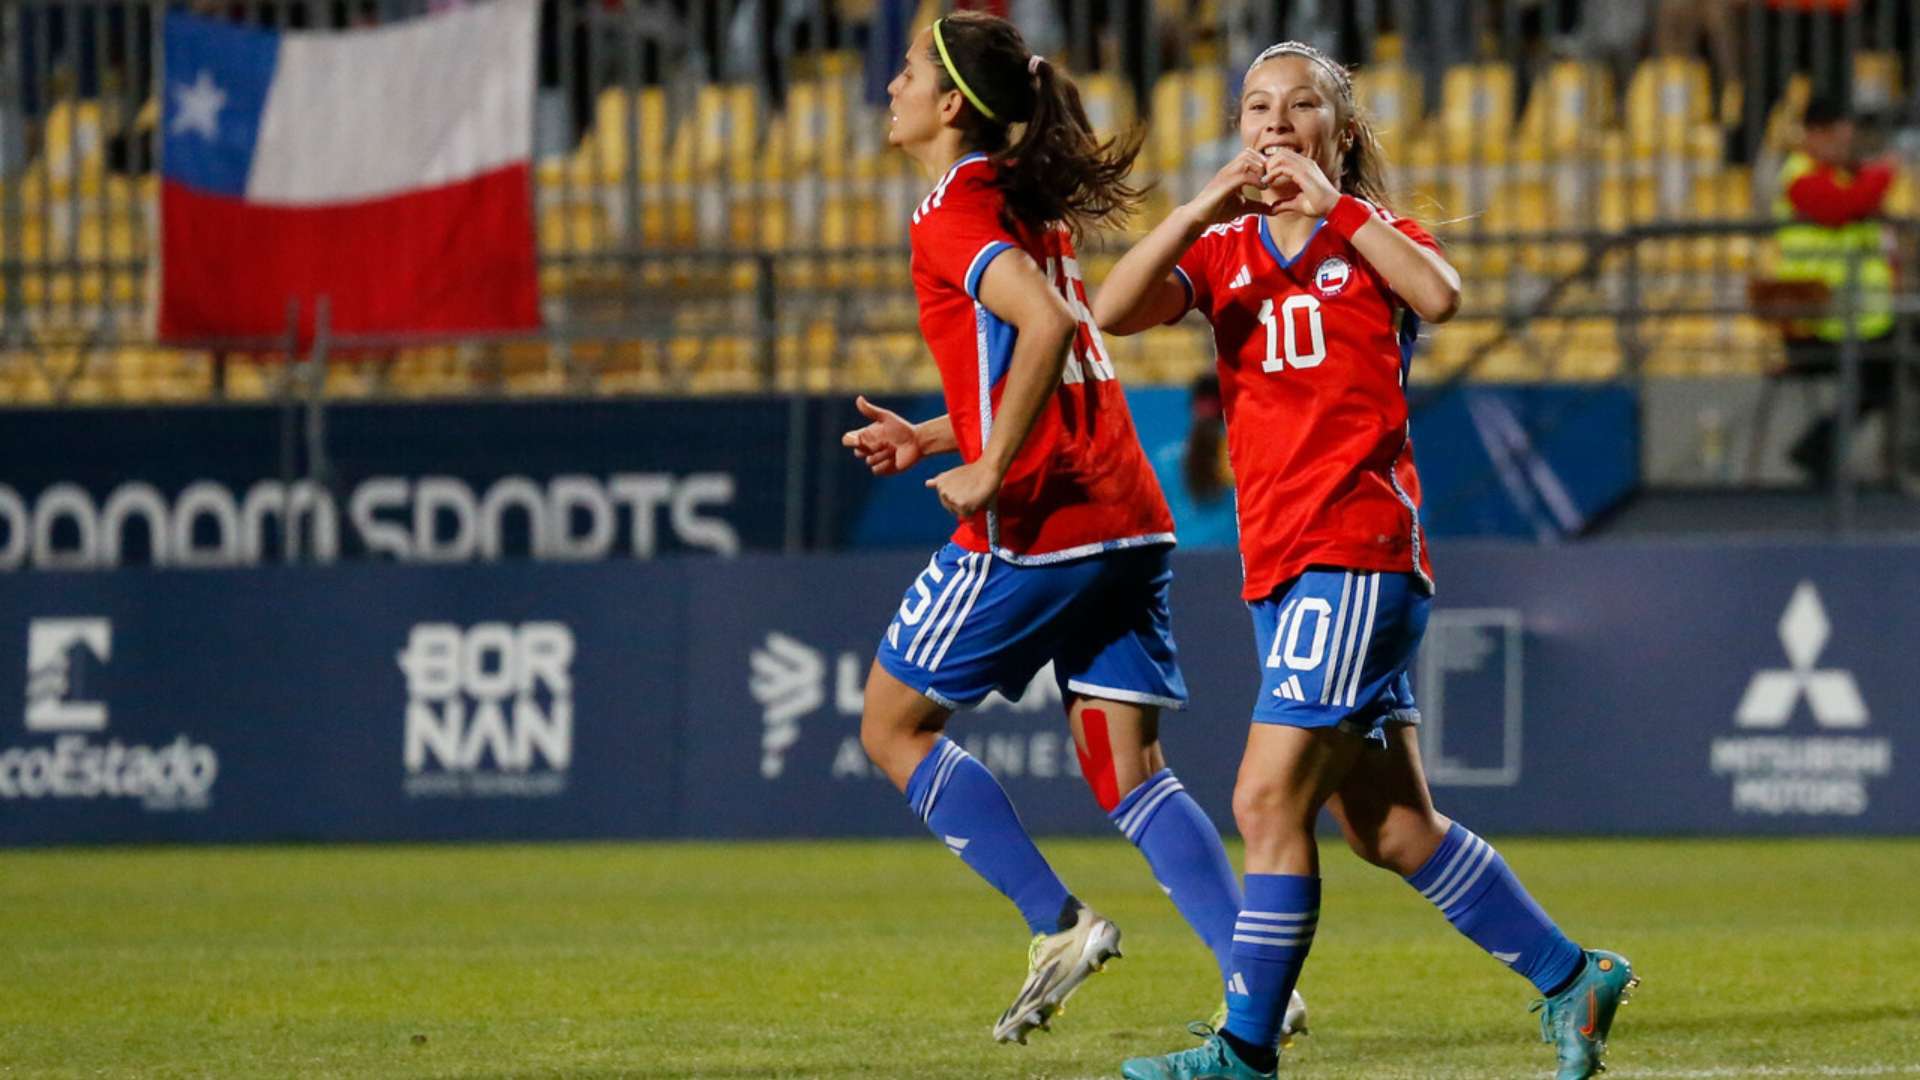 Chile will contest the gold medal in female football after beating the USA